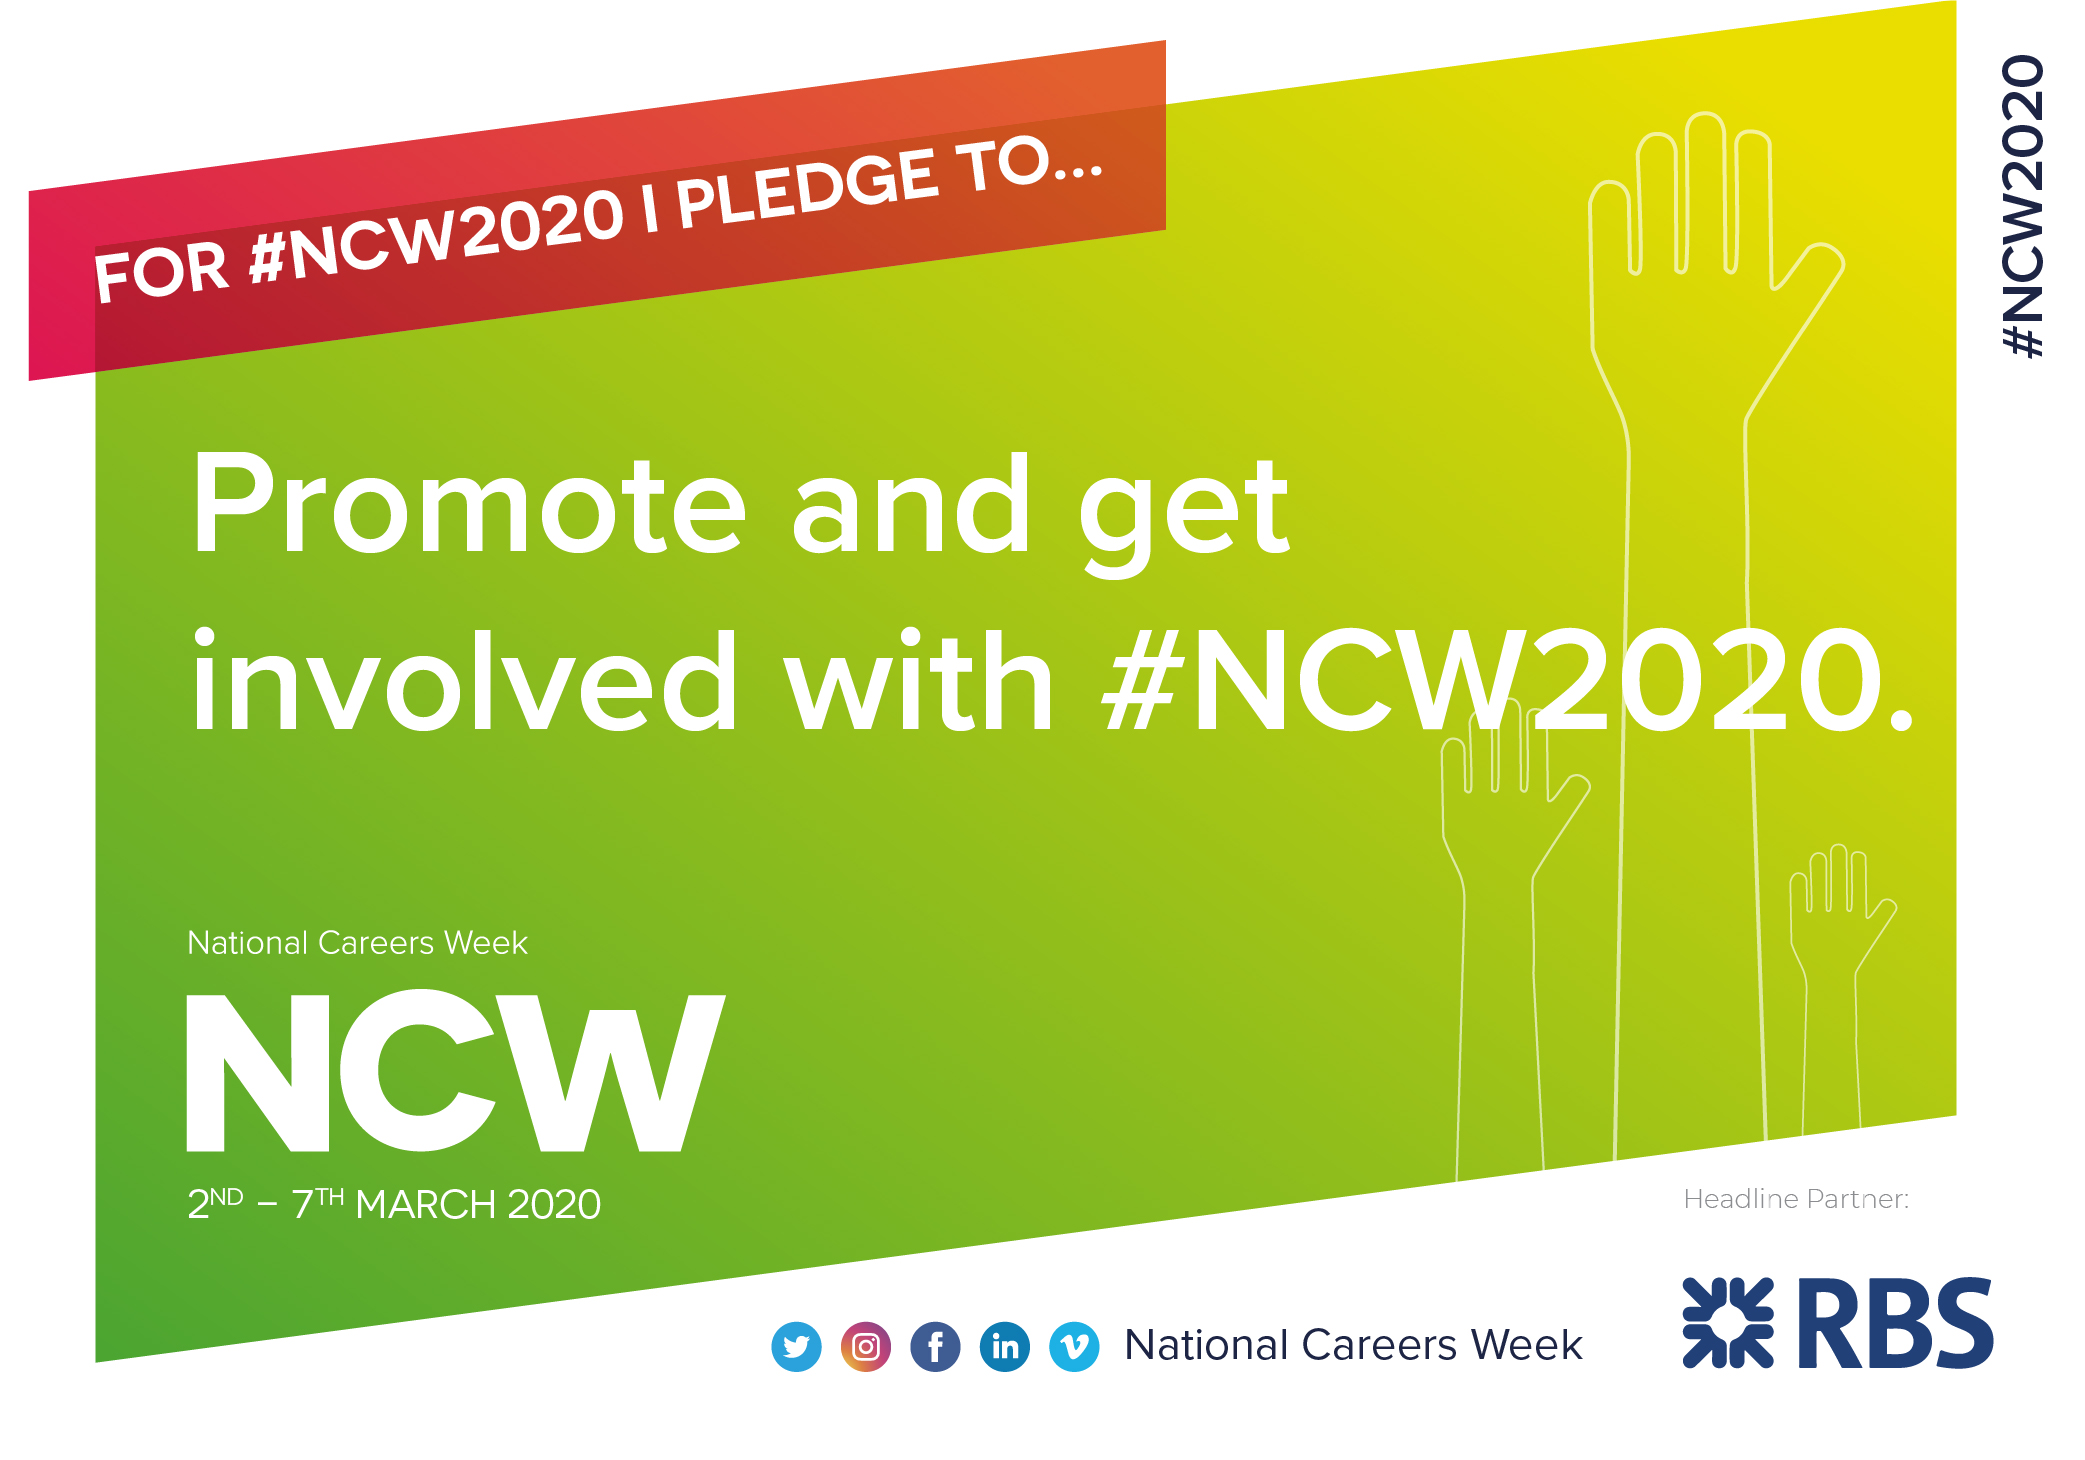 Wirral Met College pledges to get involved in NCW2020 